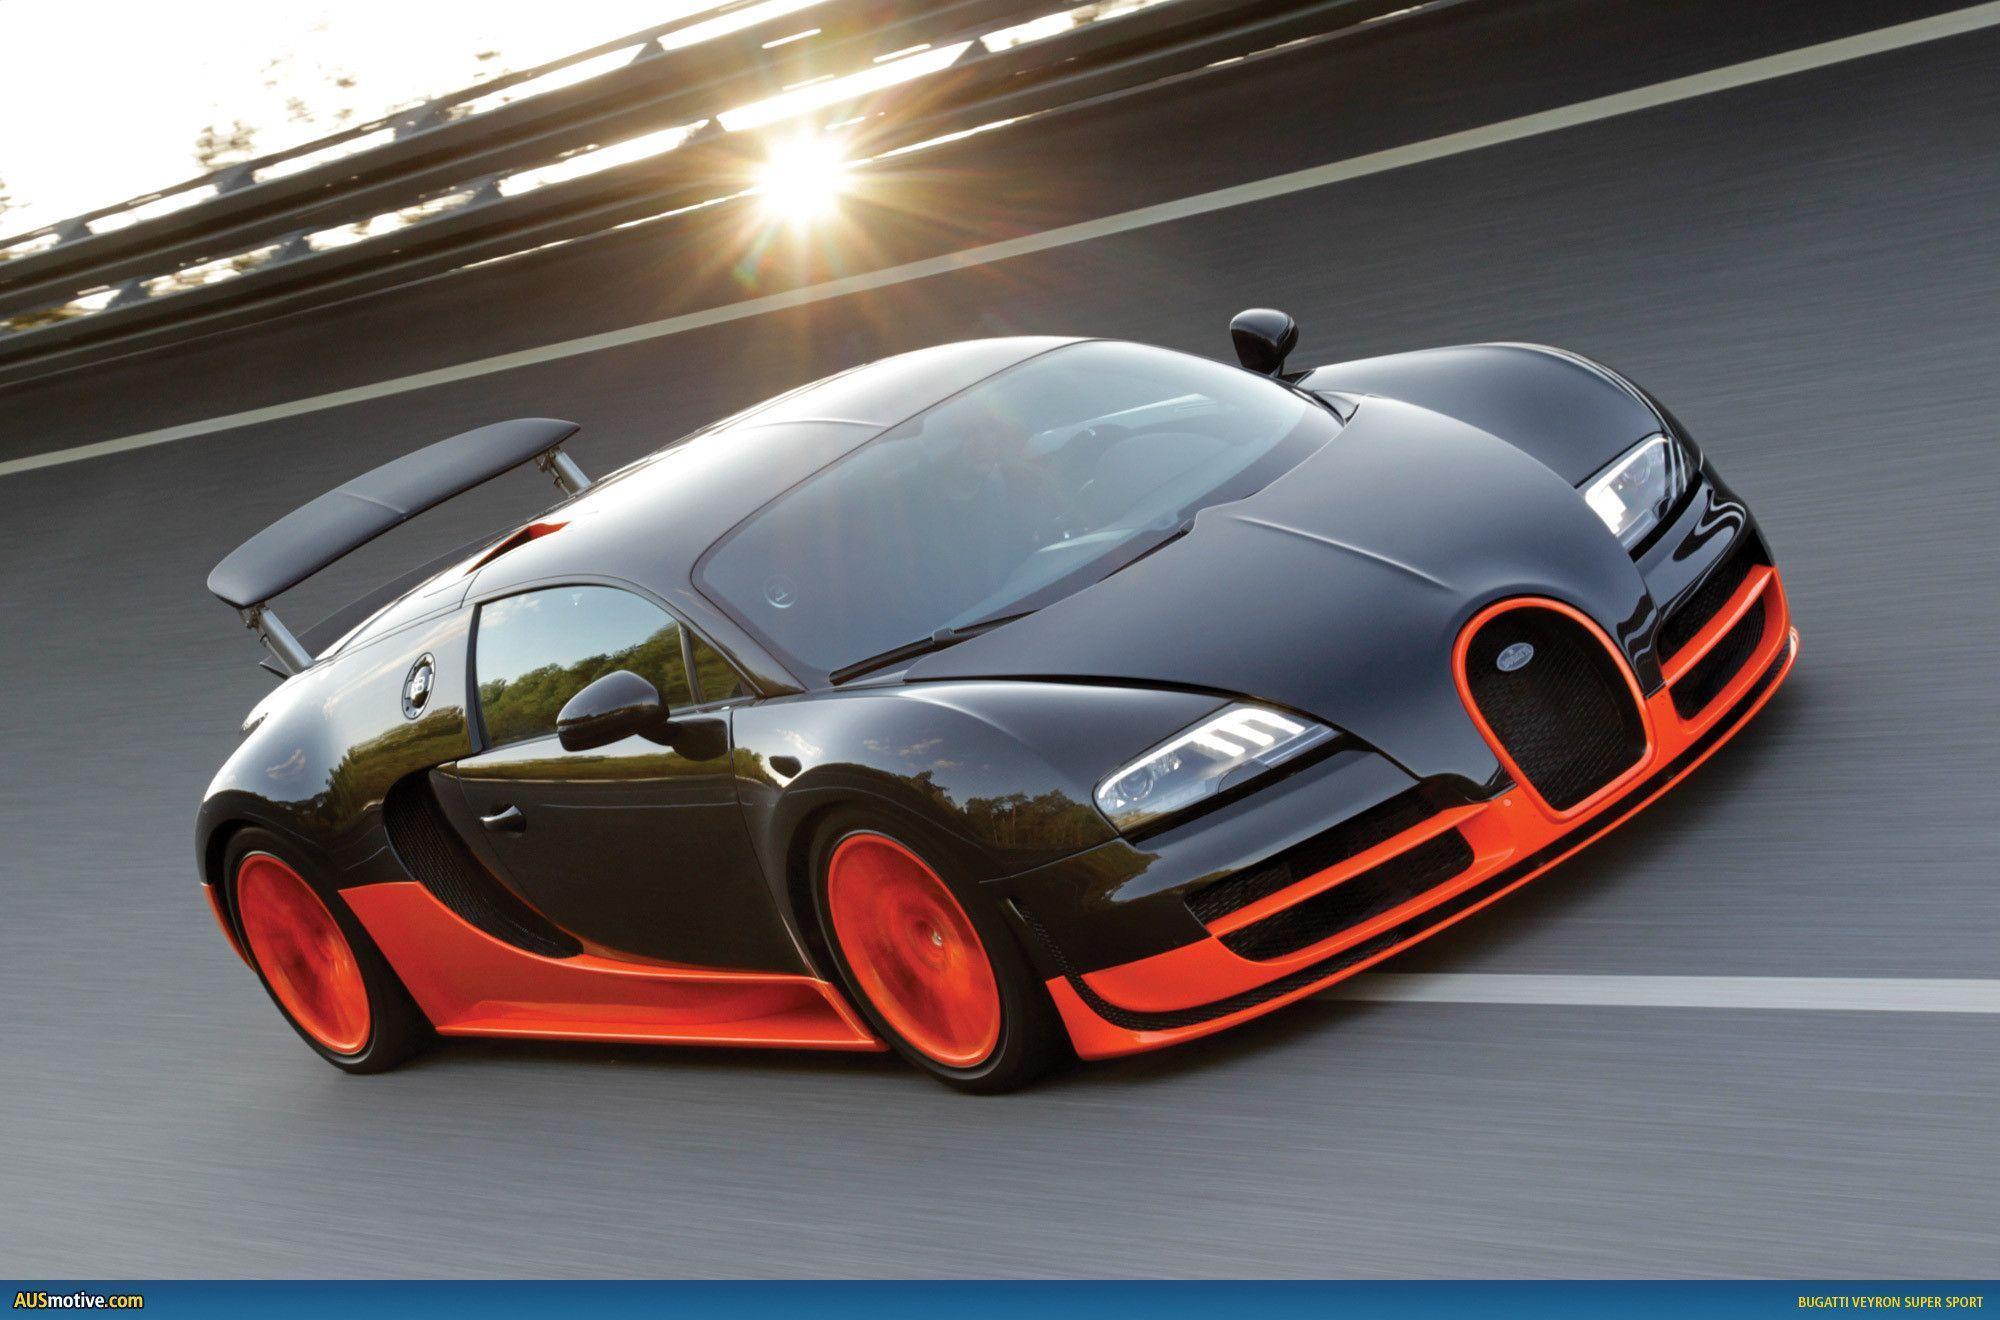 Coolest Cars In The World 2013 HD Cool 7 HD Wallpaper. amagico